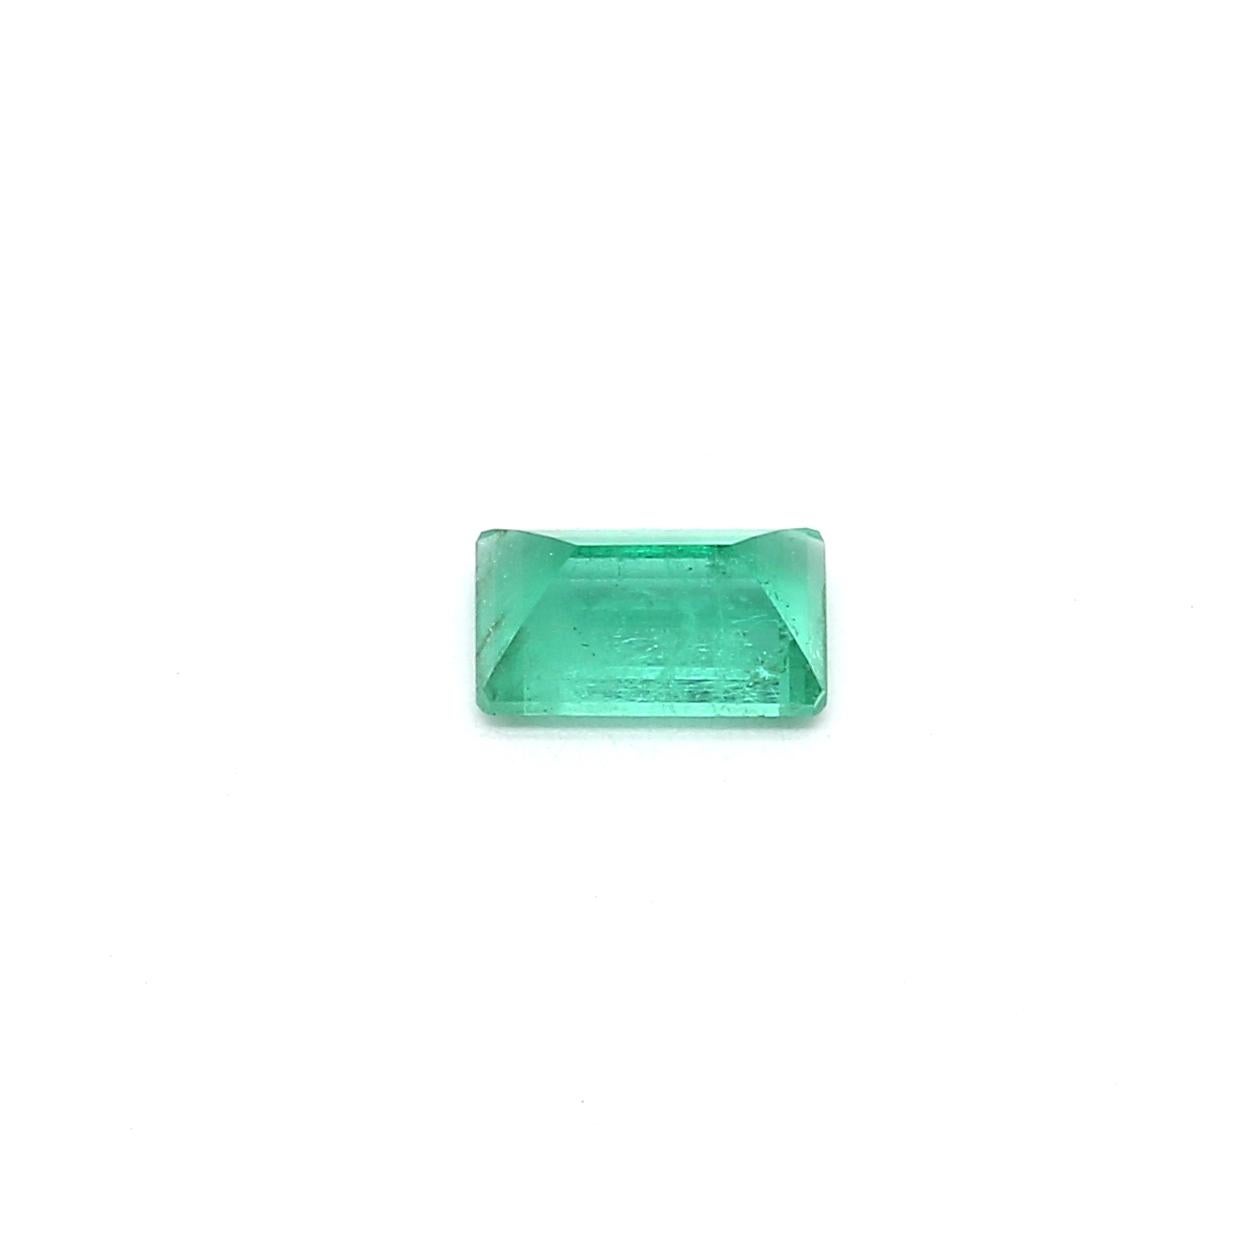 An amazing Russian Emerald which allows jewelers to create a unique piece of wearable art.
This exceptional quality gemstone would make a custom-made jewelry design. Perfect for a Ring or Pendant.

Shape - Baguette
Weight - 0.52 ct
Treatment - Minor